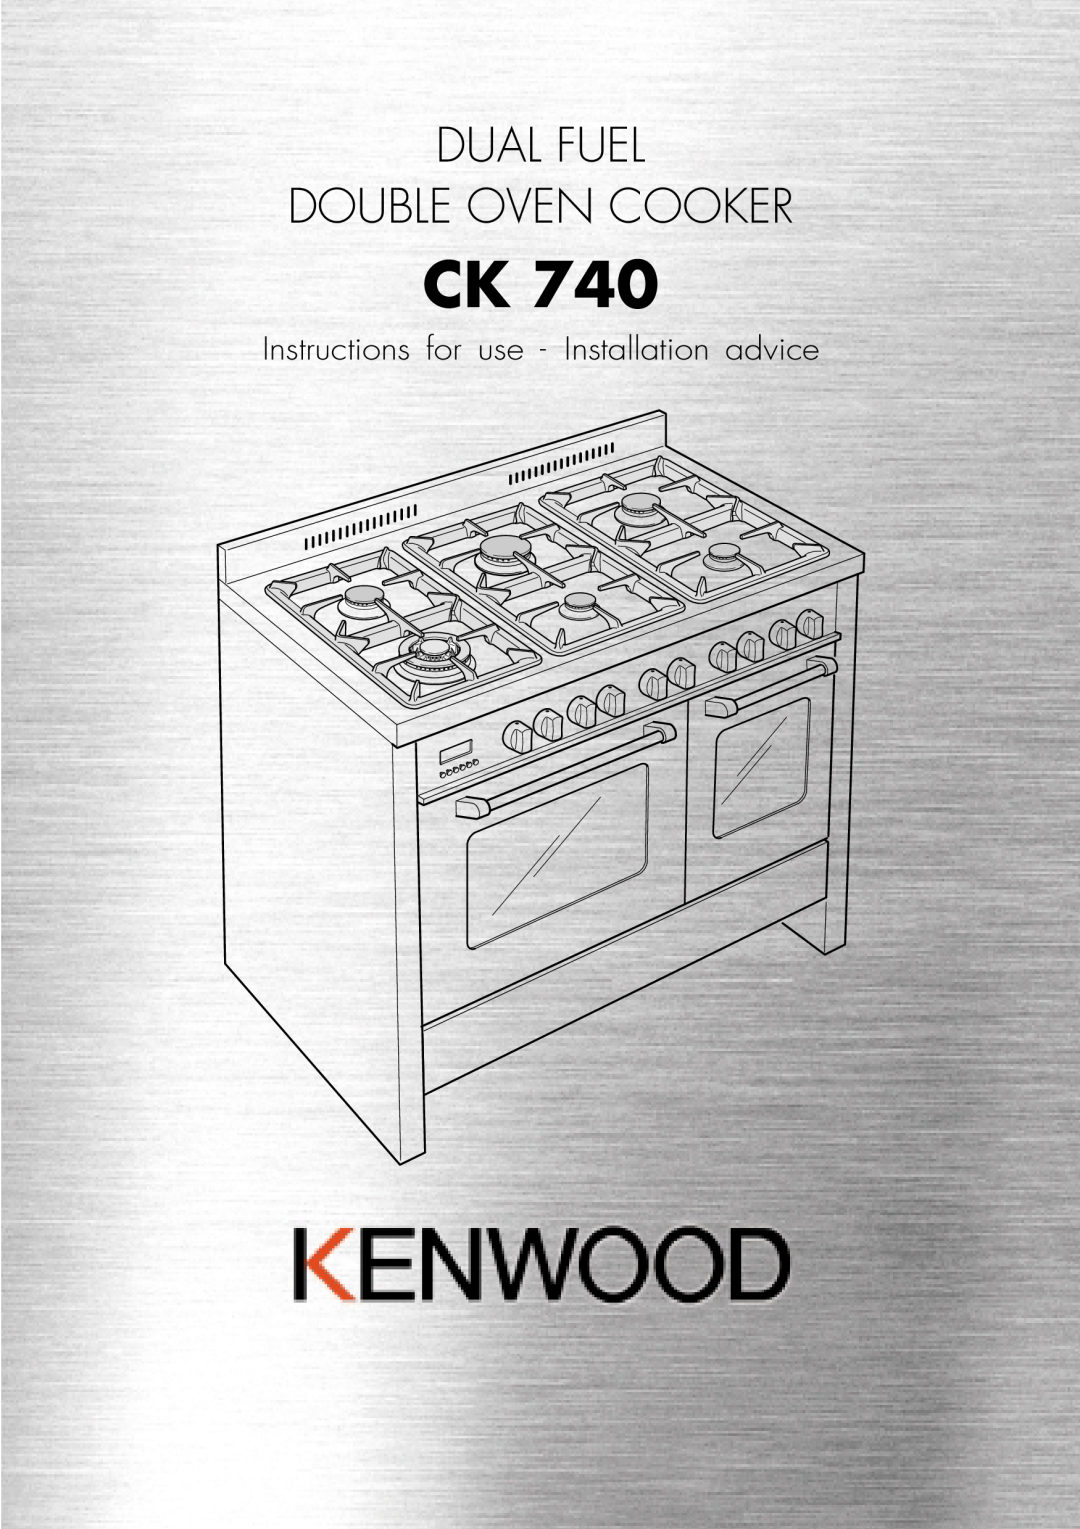 Kenwood CK 740 manual Dual Fuel Double Oven Cooker, Instructions for use - Installation advice 